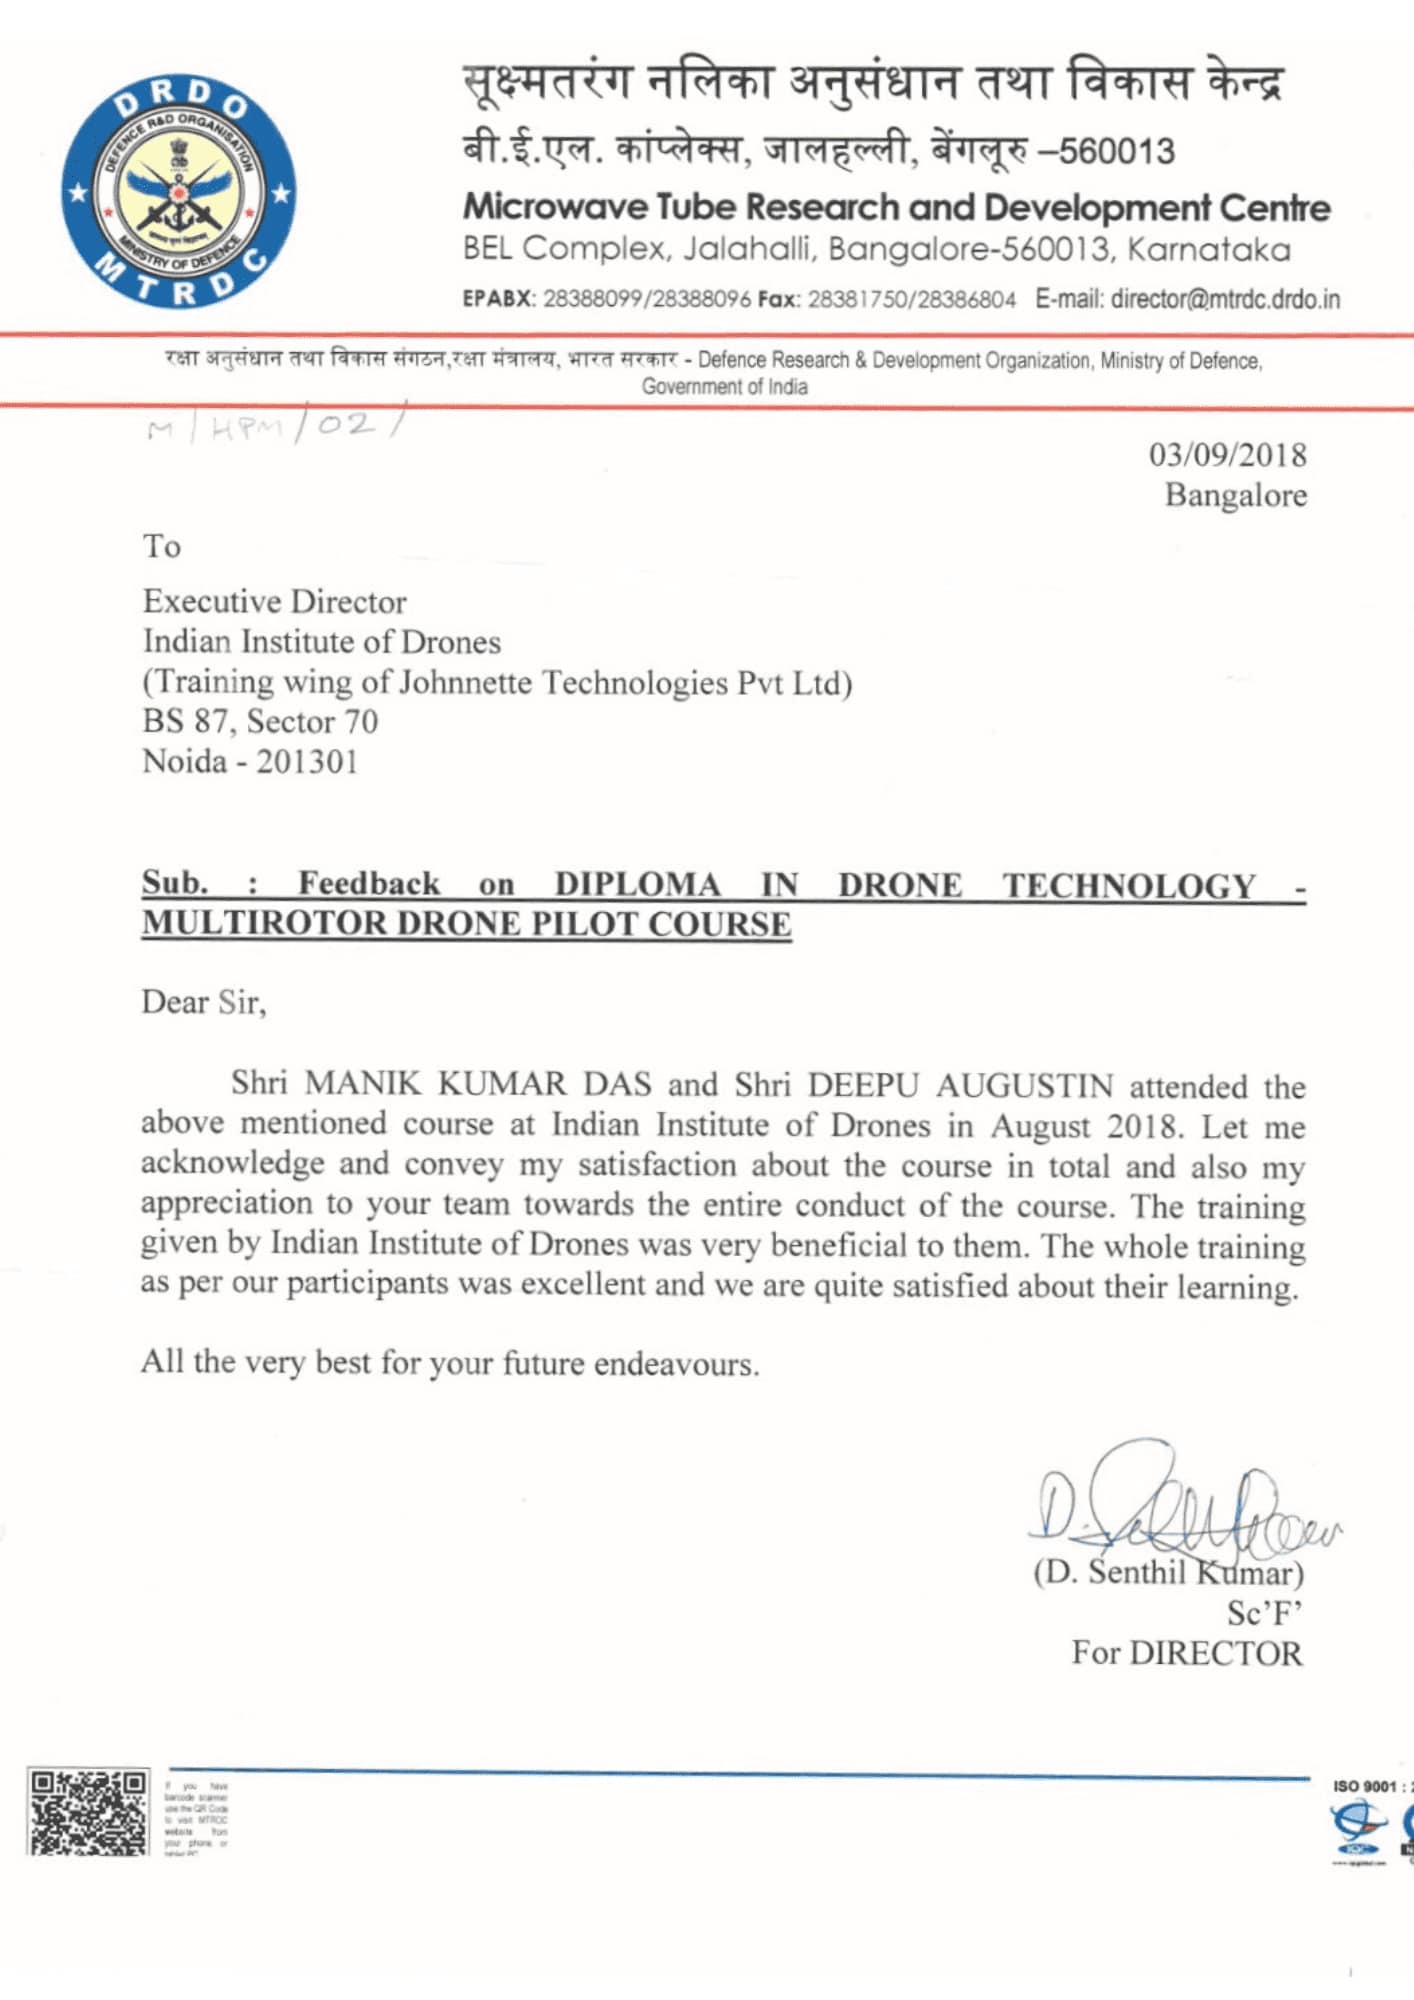 Satisfactory Letter from MTRDC DRDO